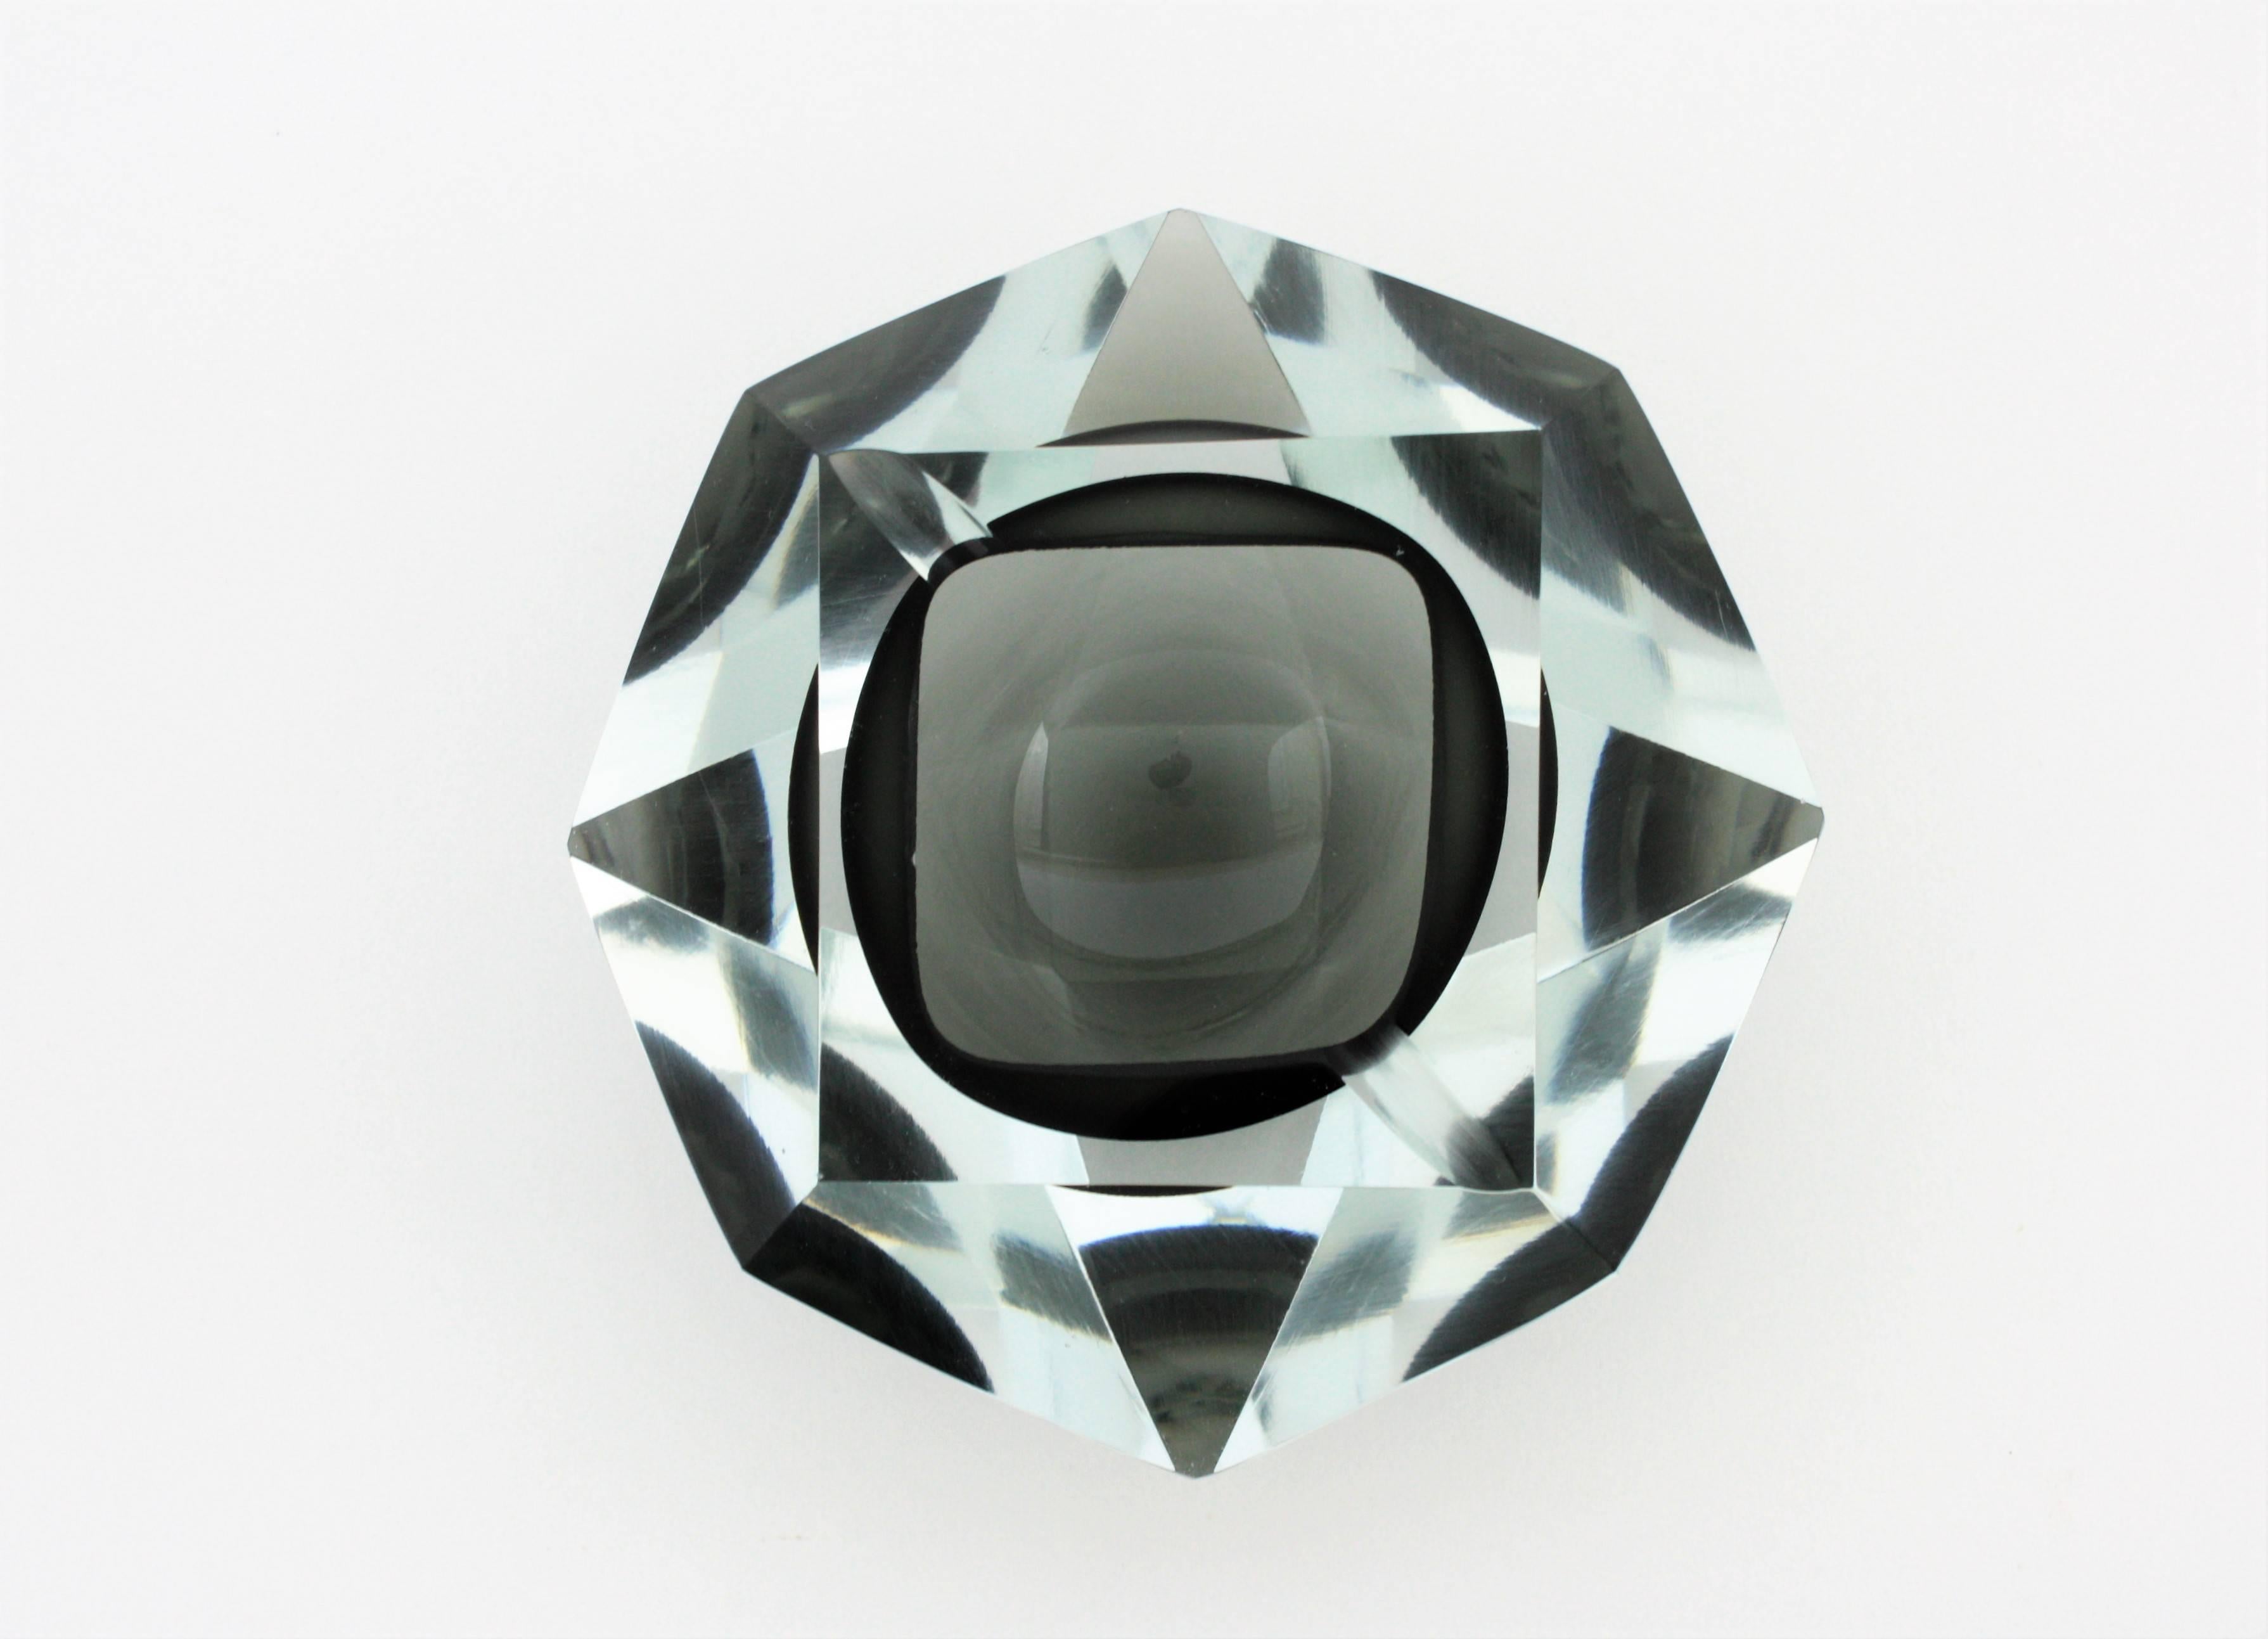 A beautiful smoked grey Sommerso faceted Murano glass astray attributed to Flavio Poli. Grey glass cased into clear glass and a highly decorative 12 faced geometric design.
Useful as bowl, ashtray, jewelry bowl or paperweight,
Italy,